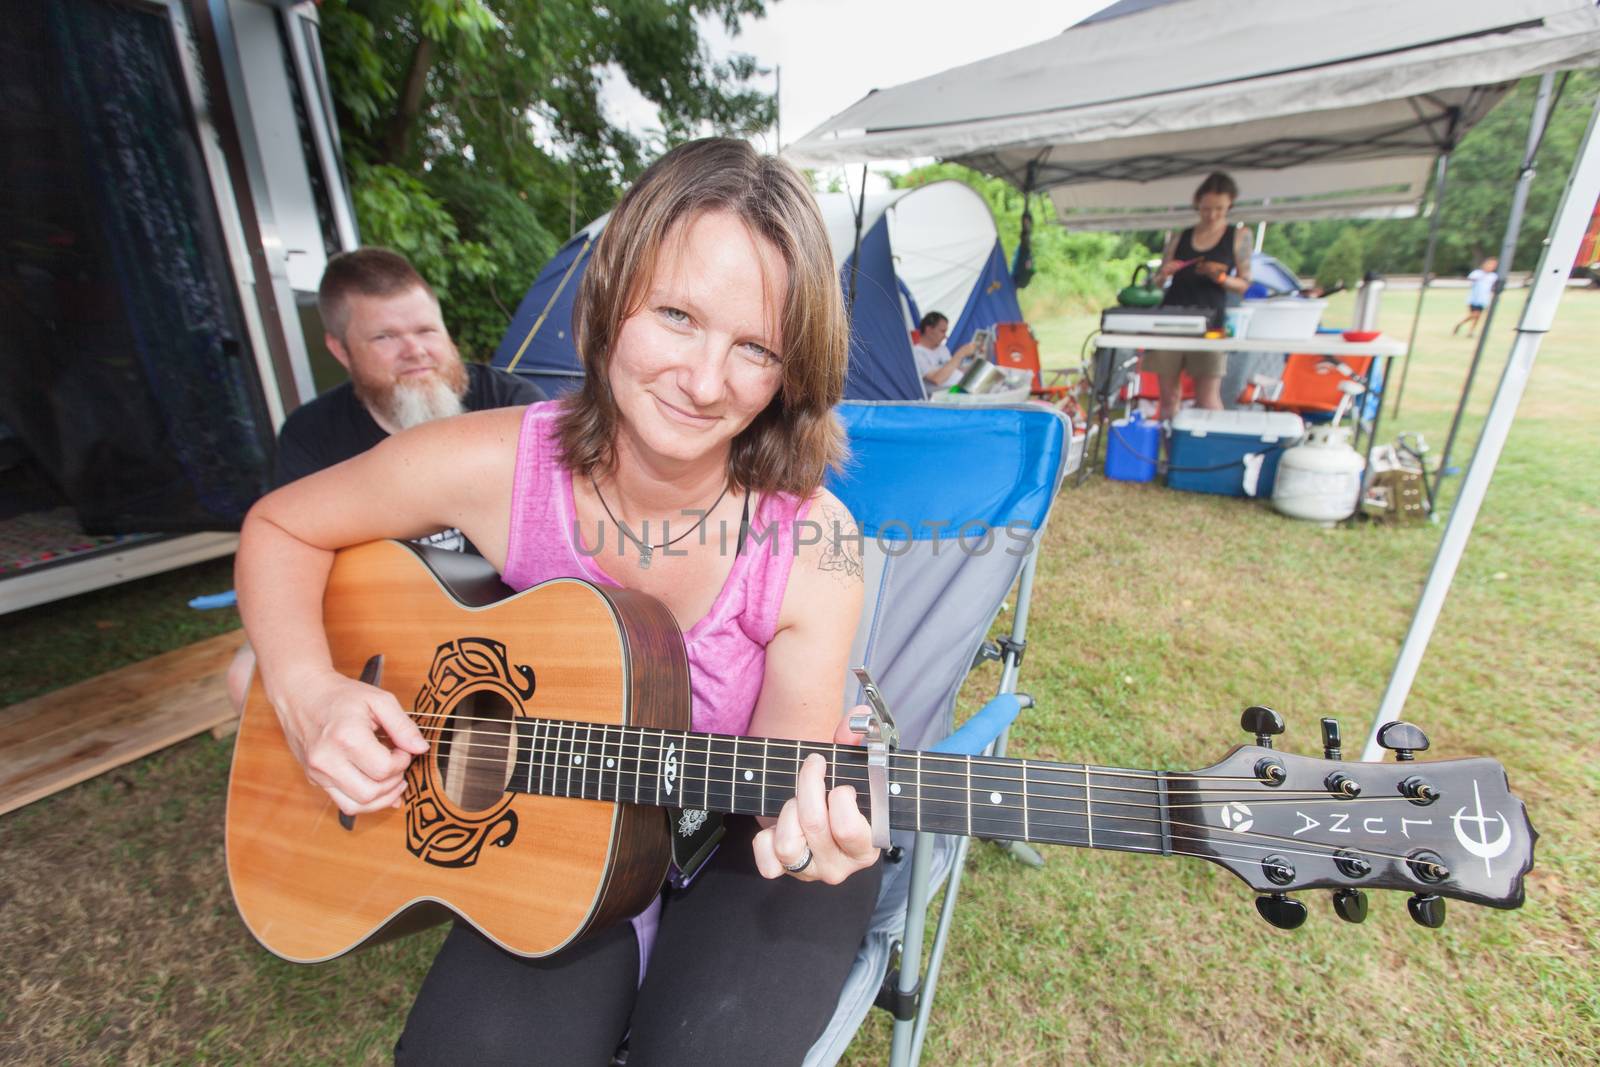 HOT SPRINGS, NC - JULY 7: Smiling young adult woman in pink playing her guitar beside trailer at the Wild Goose Festival on July 7, 2016 in Hot Springs, NC, USA.